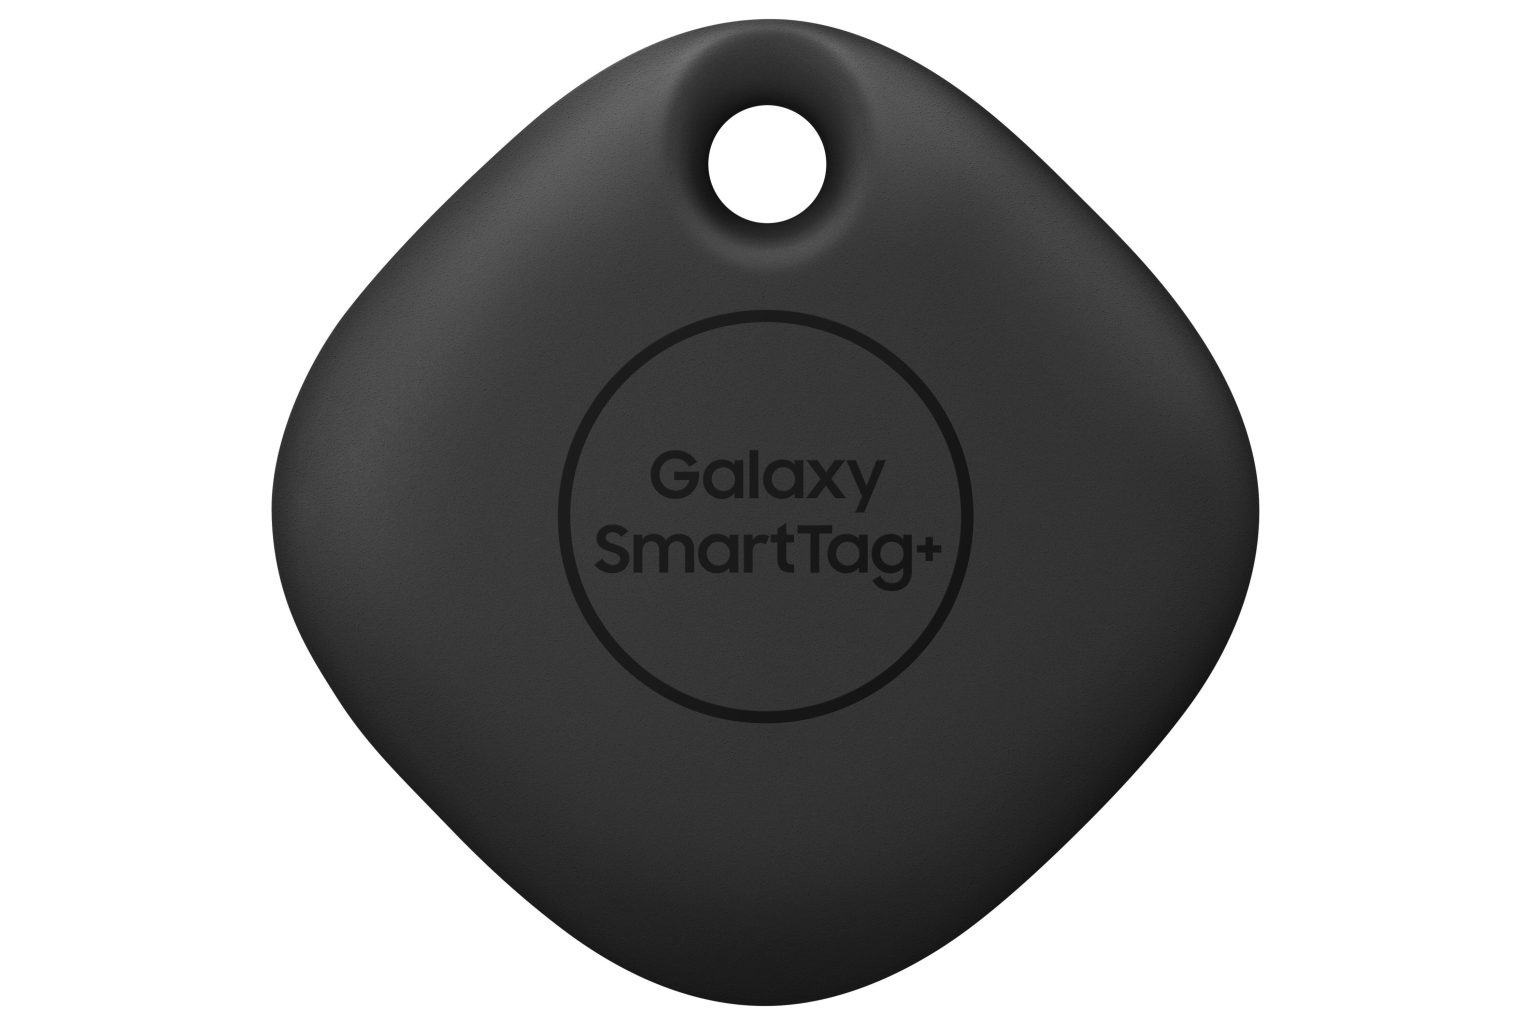 Samsung Announces $40 SmartTag Plus, Which Uses Bluetooth And UWB To Locate Lost Items, And AR To Guide Users To Them, Launching Globally On April 16 (David Priest/CNET)